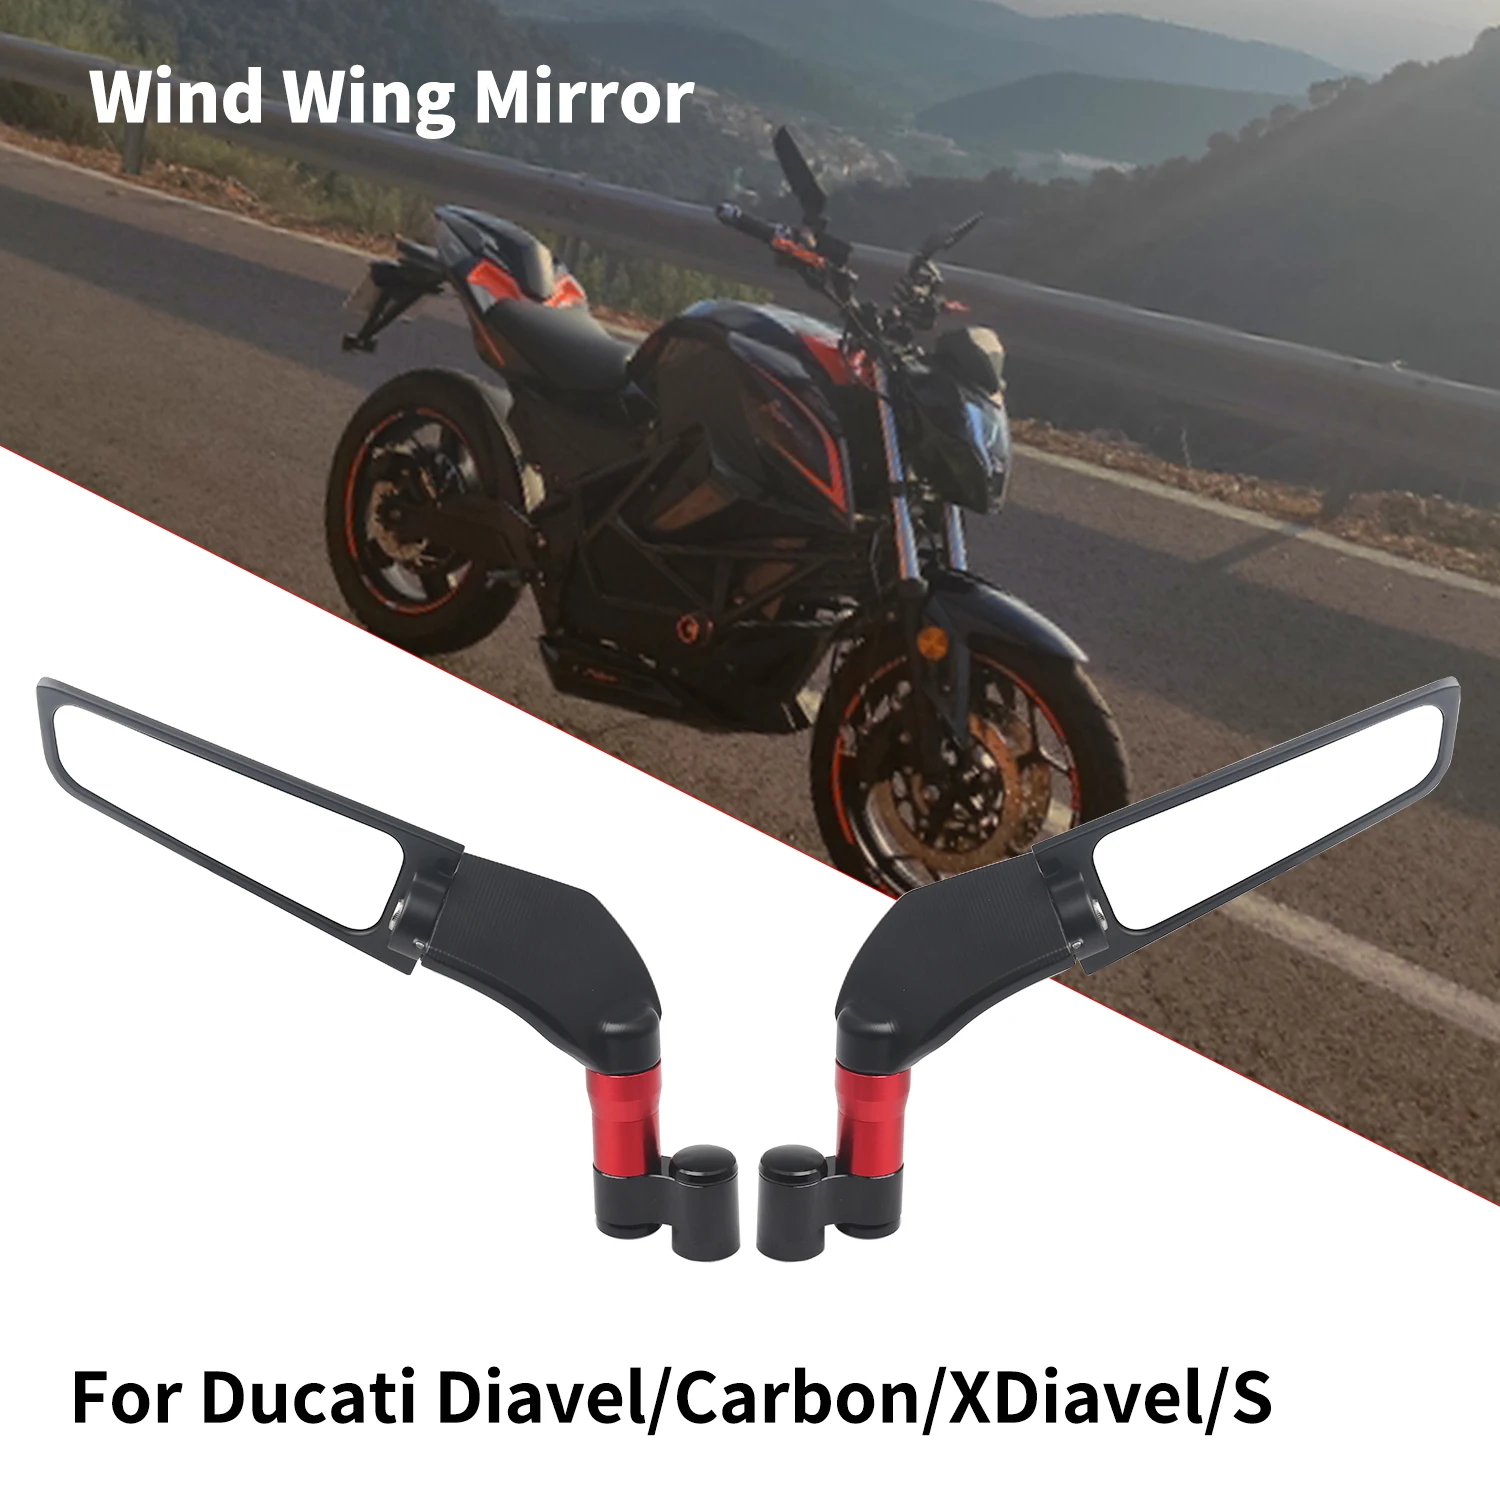 

For Ducati Diavel/Carbon/XDiavel/S MULTISTRADA Universal Motorcycle Mirror Wind Wing side Rearview Reversing mirror